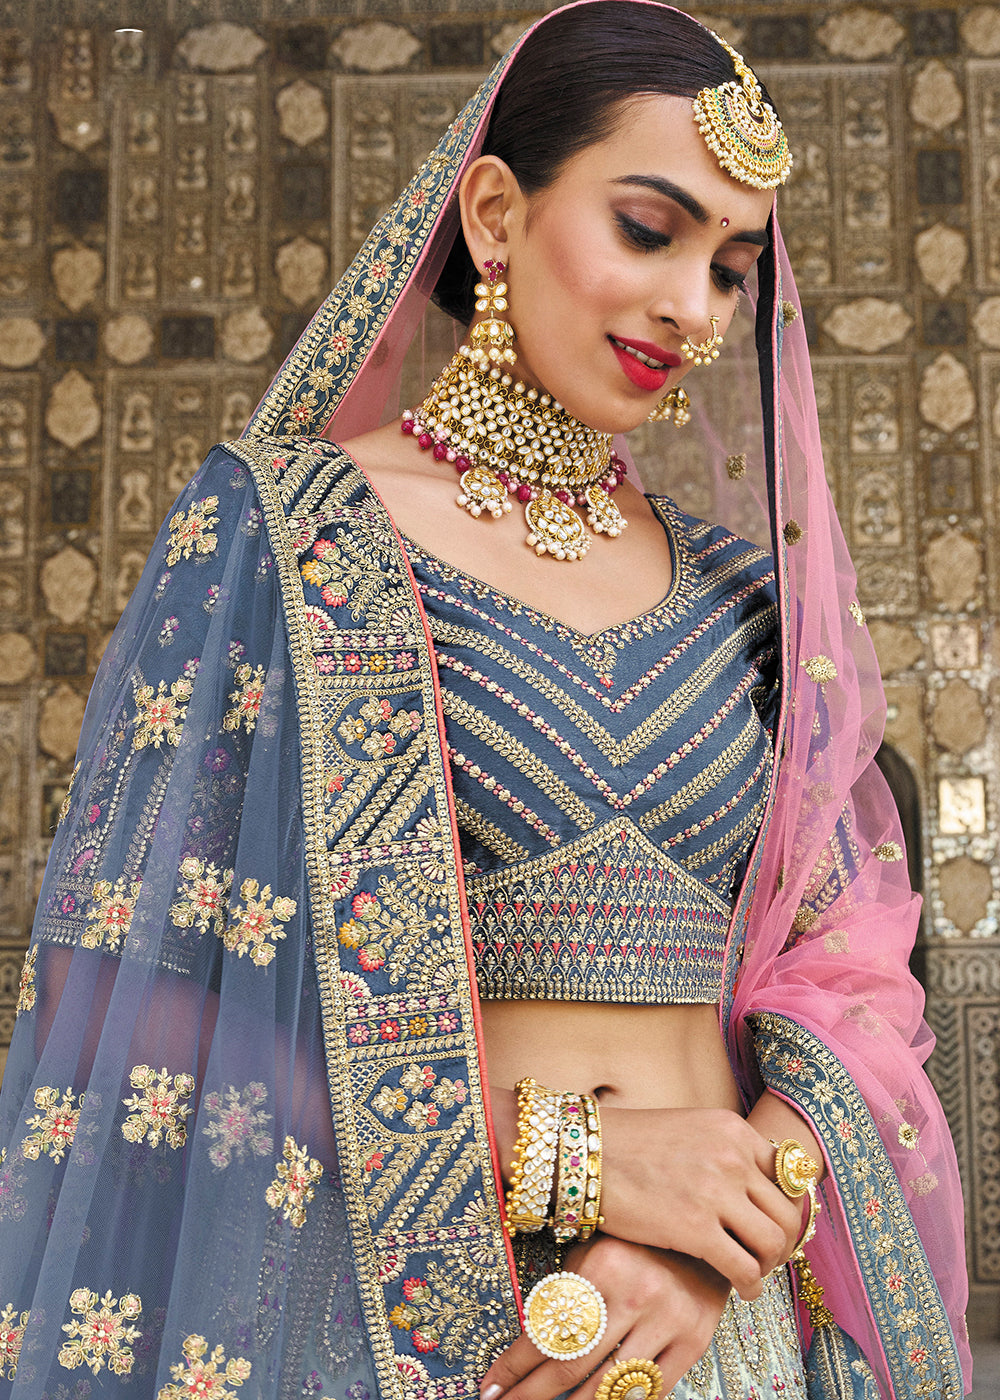 Buy Now Subline Blue Bridal Wear Heavy Embroidered Silk Lehenga Choli Online in USA, UK, Canada & Worldwide at Empress Clothing.